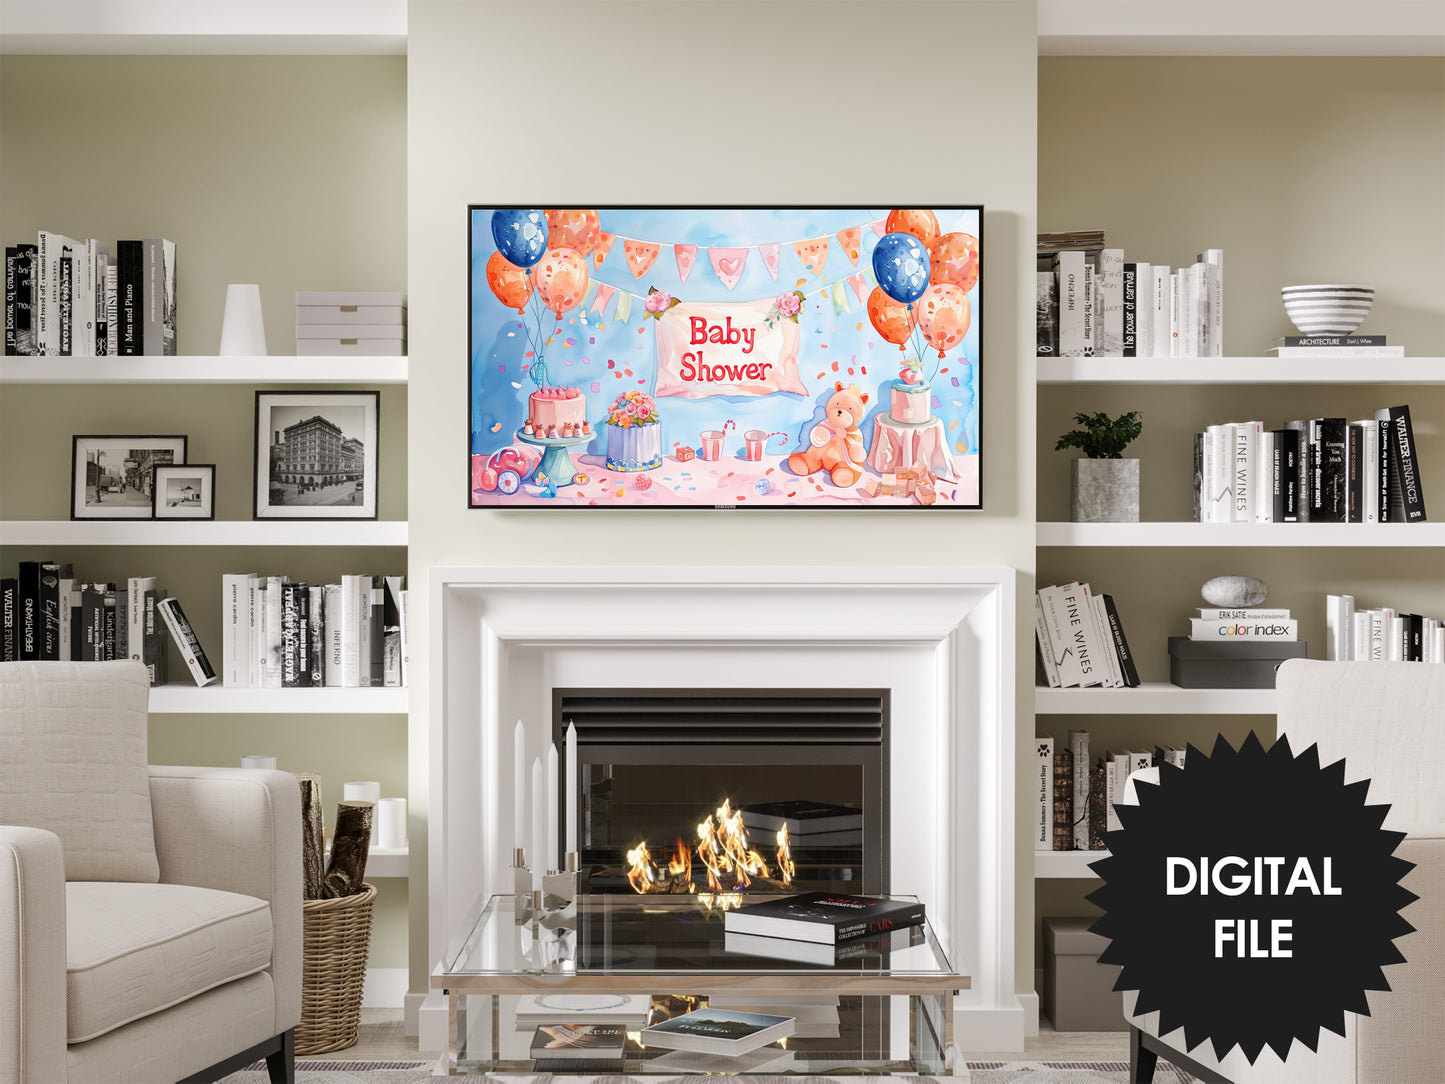 Baby Shower Frame TV Art | Gender Neutral Pink Blue Baby Shower Party Decor preview on wall in living room